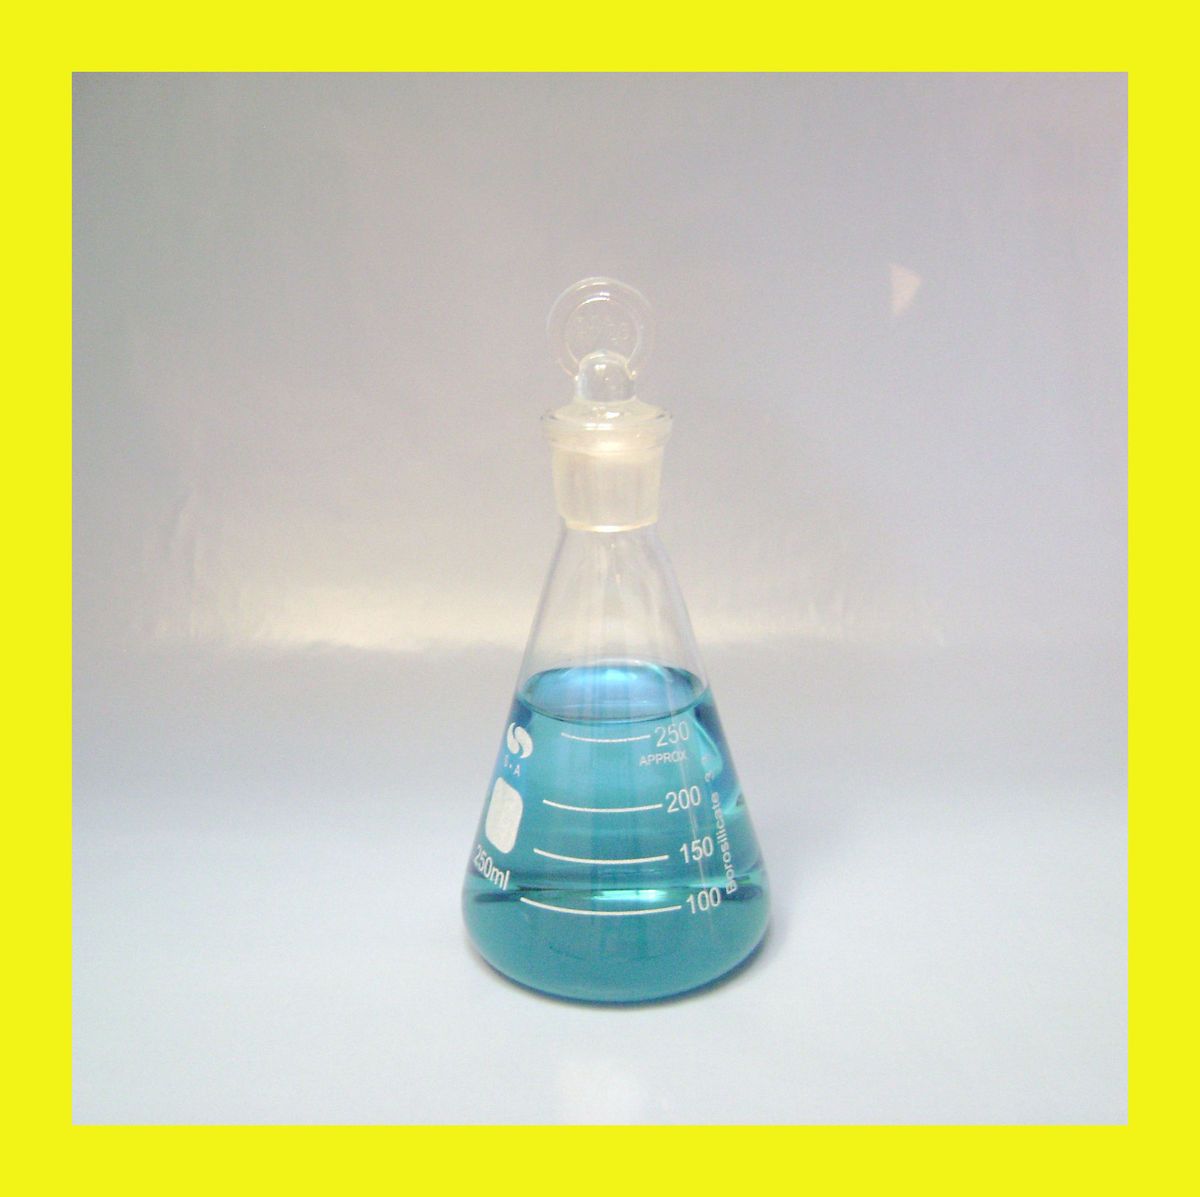 Erlenmeyer Flask 250mL mL ml with Glass Stopper Borosilicate Glass